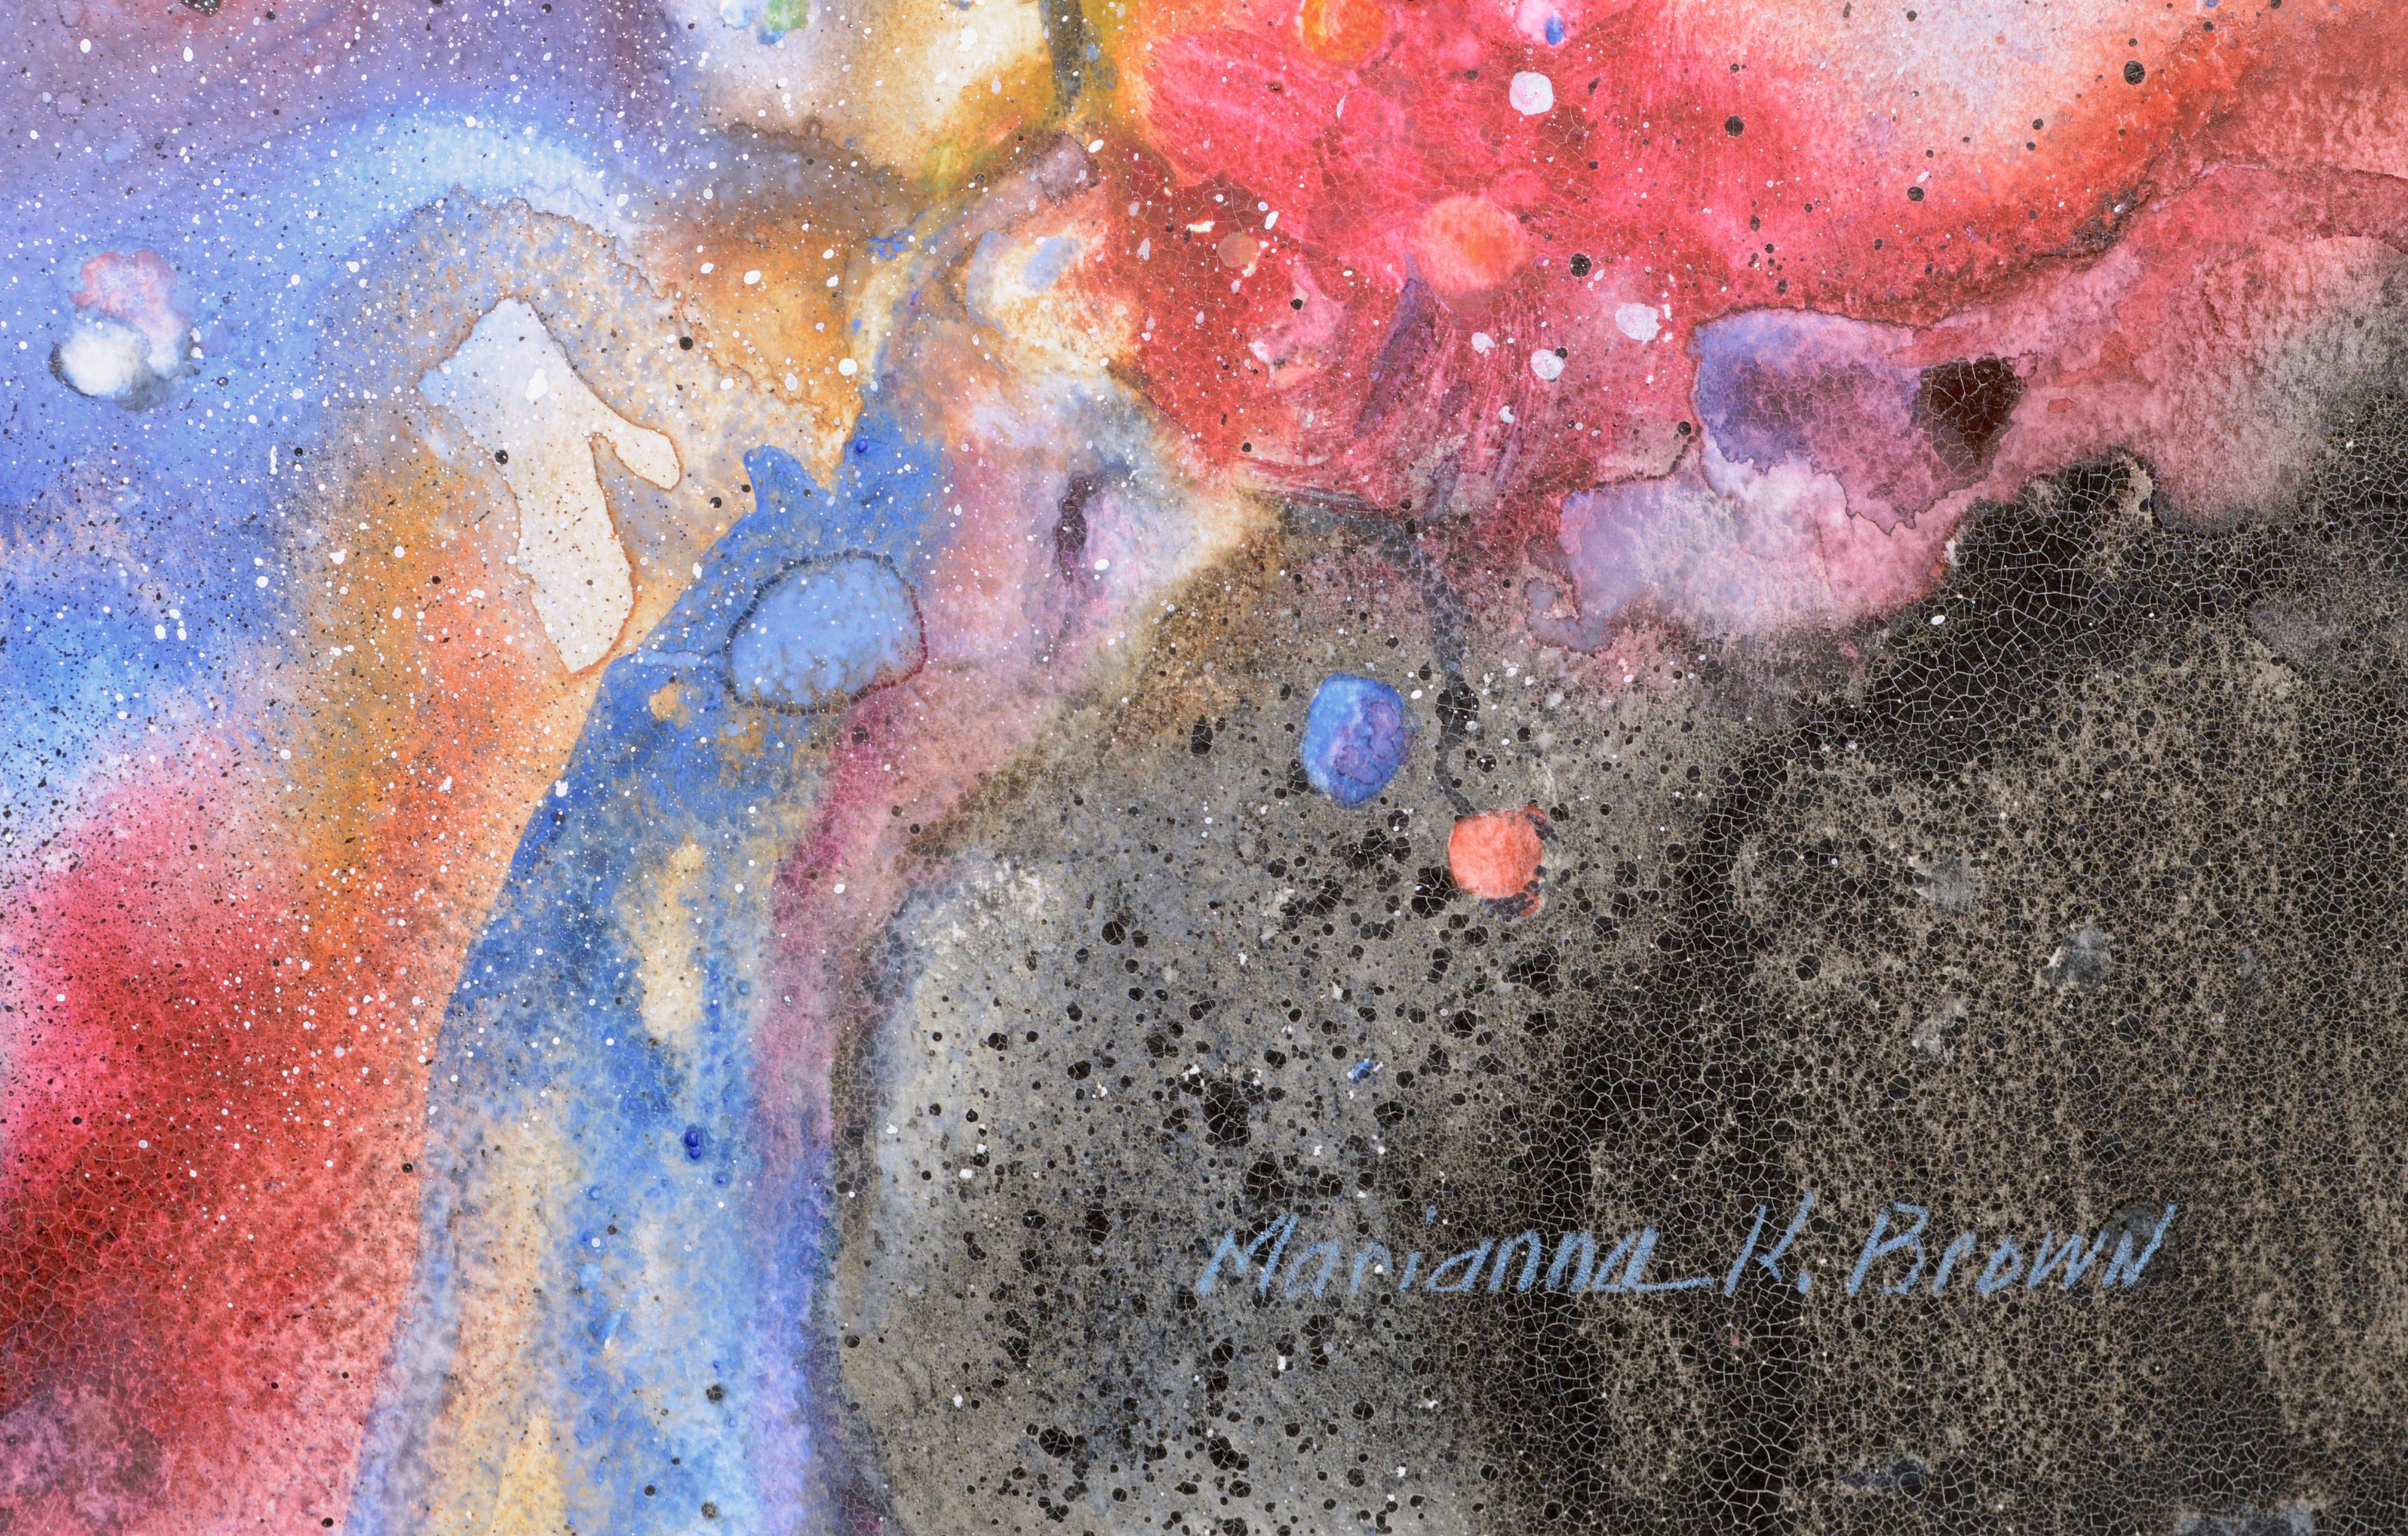 Evolution Orion Nebula (1), Colorful Cosmic Flow Abstract - Gray Abstract Painting by Marianne K. Brown